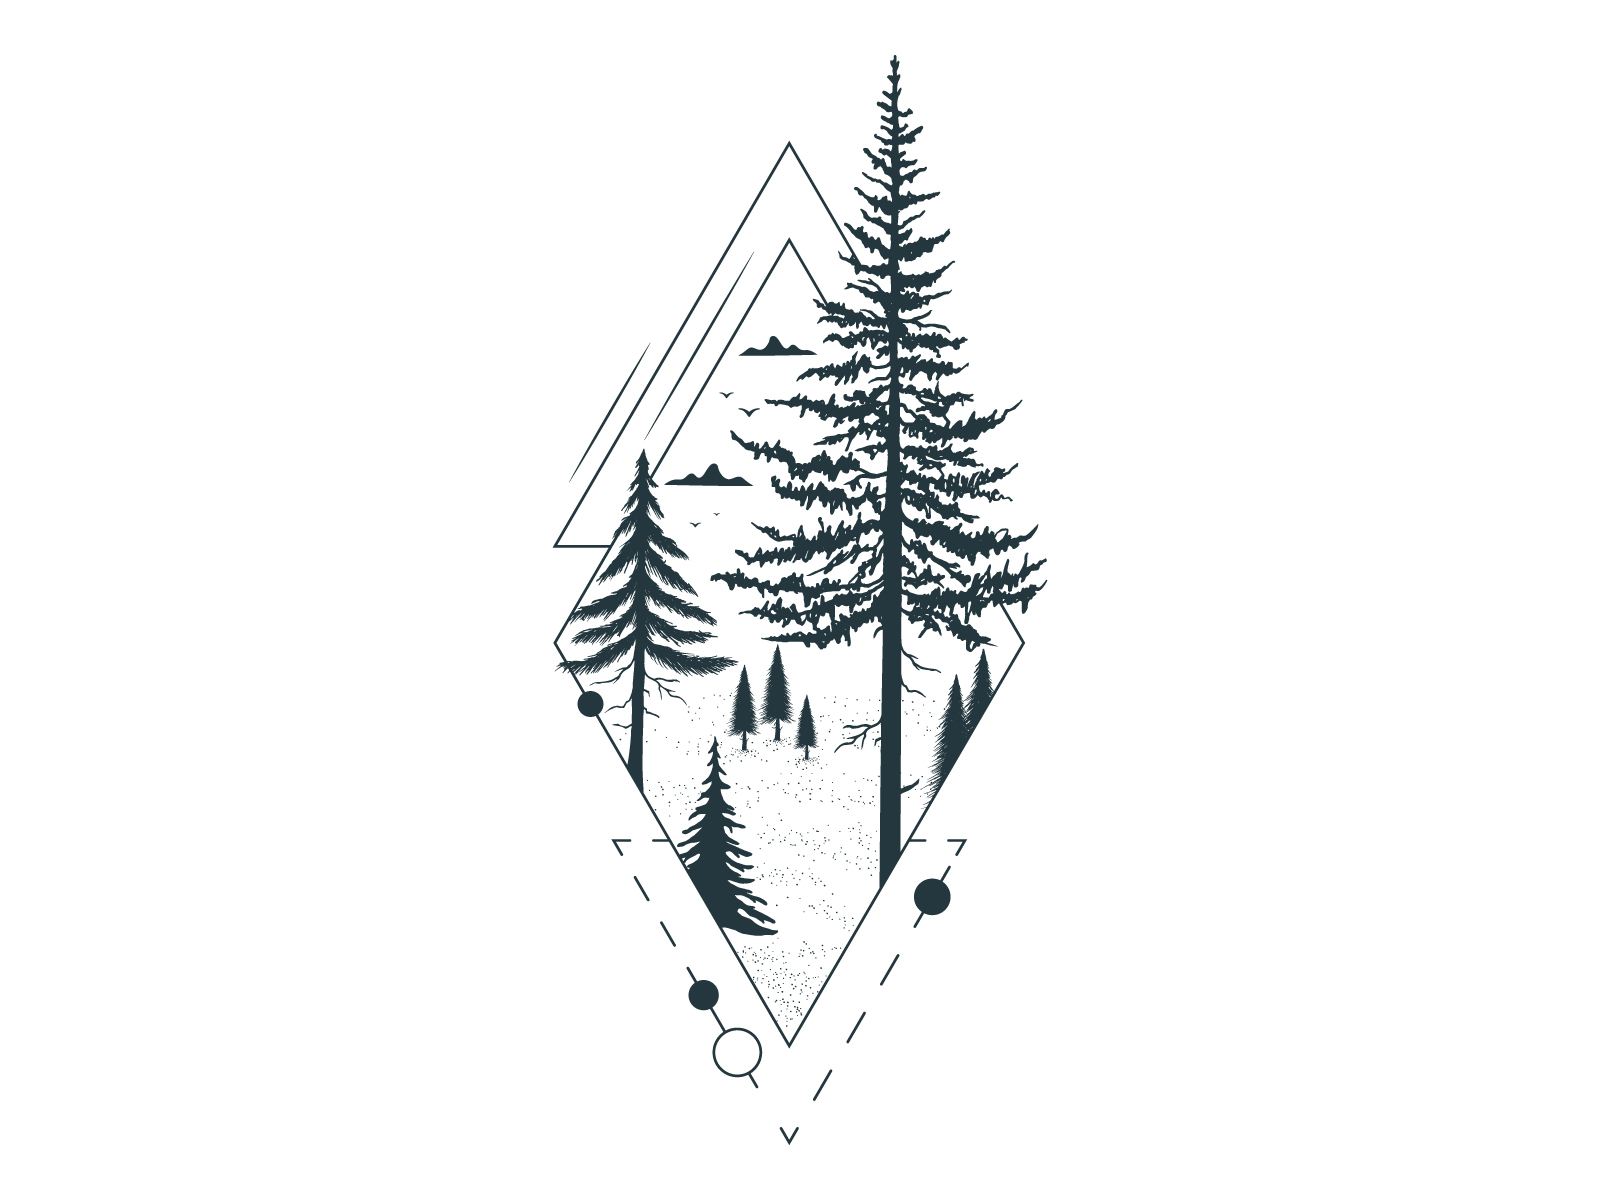 Mystical Forest Print by Kirill on Dribbble